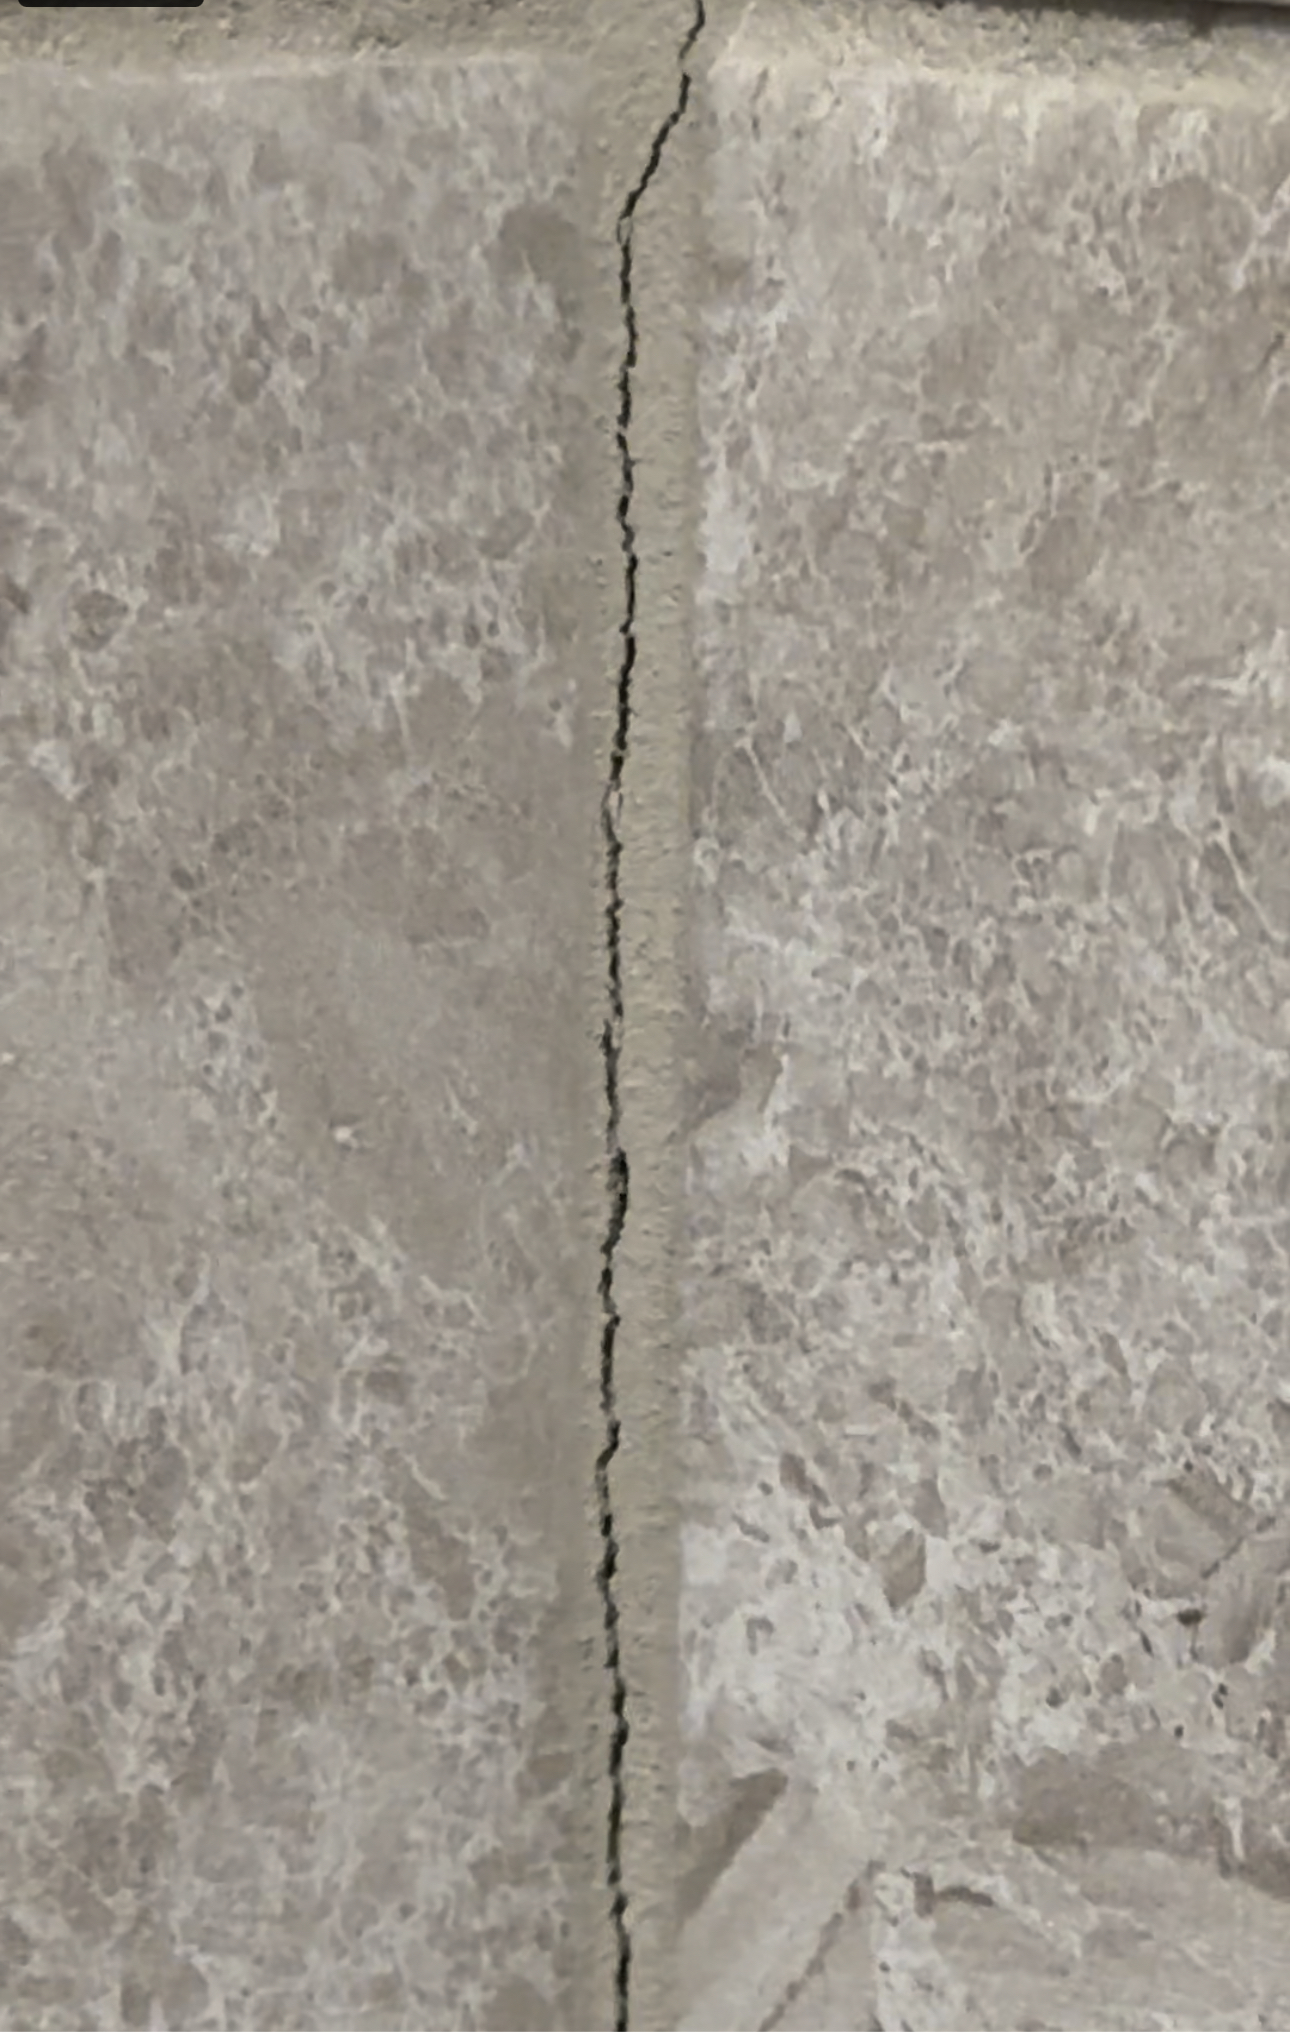 Cracked Grout